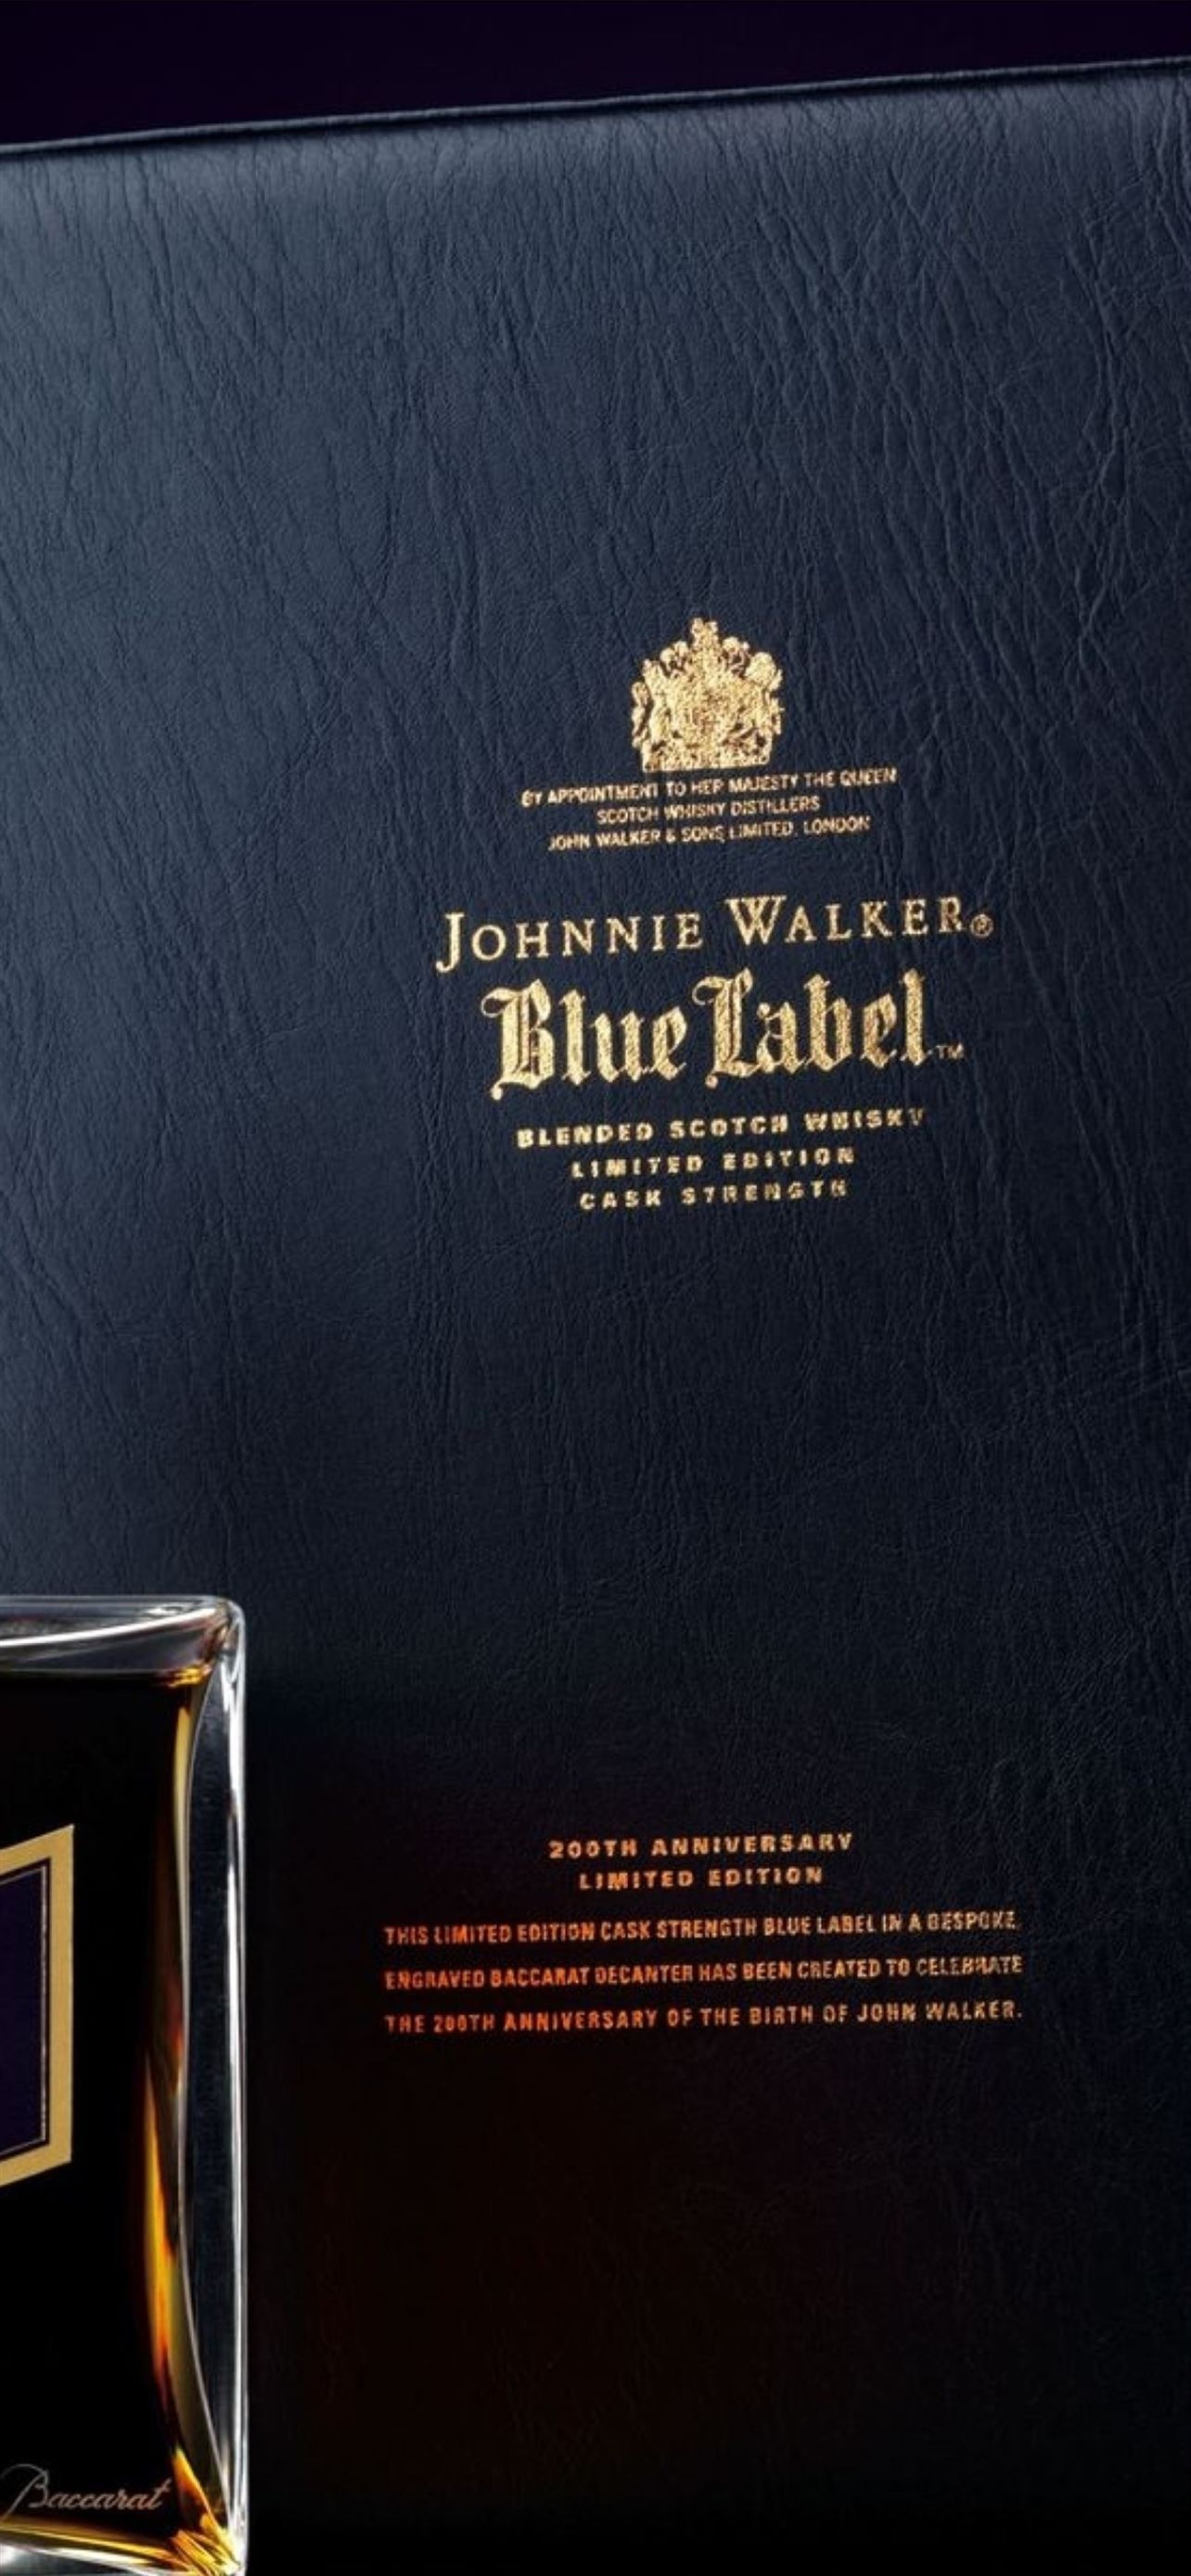 Johnnie Walker Blue Label Perfume Resolution Hd Br Iphone Wallpapers Free Download